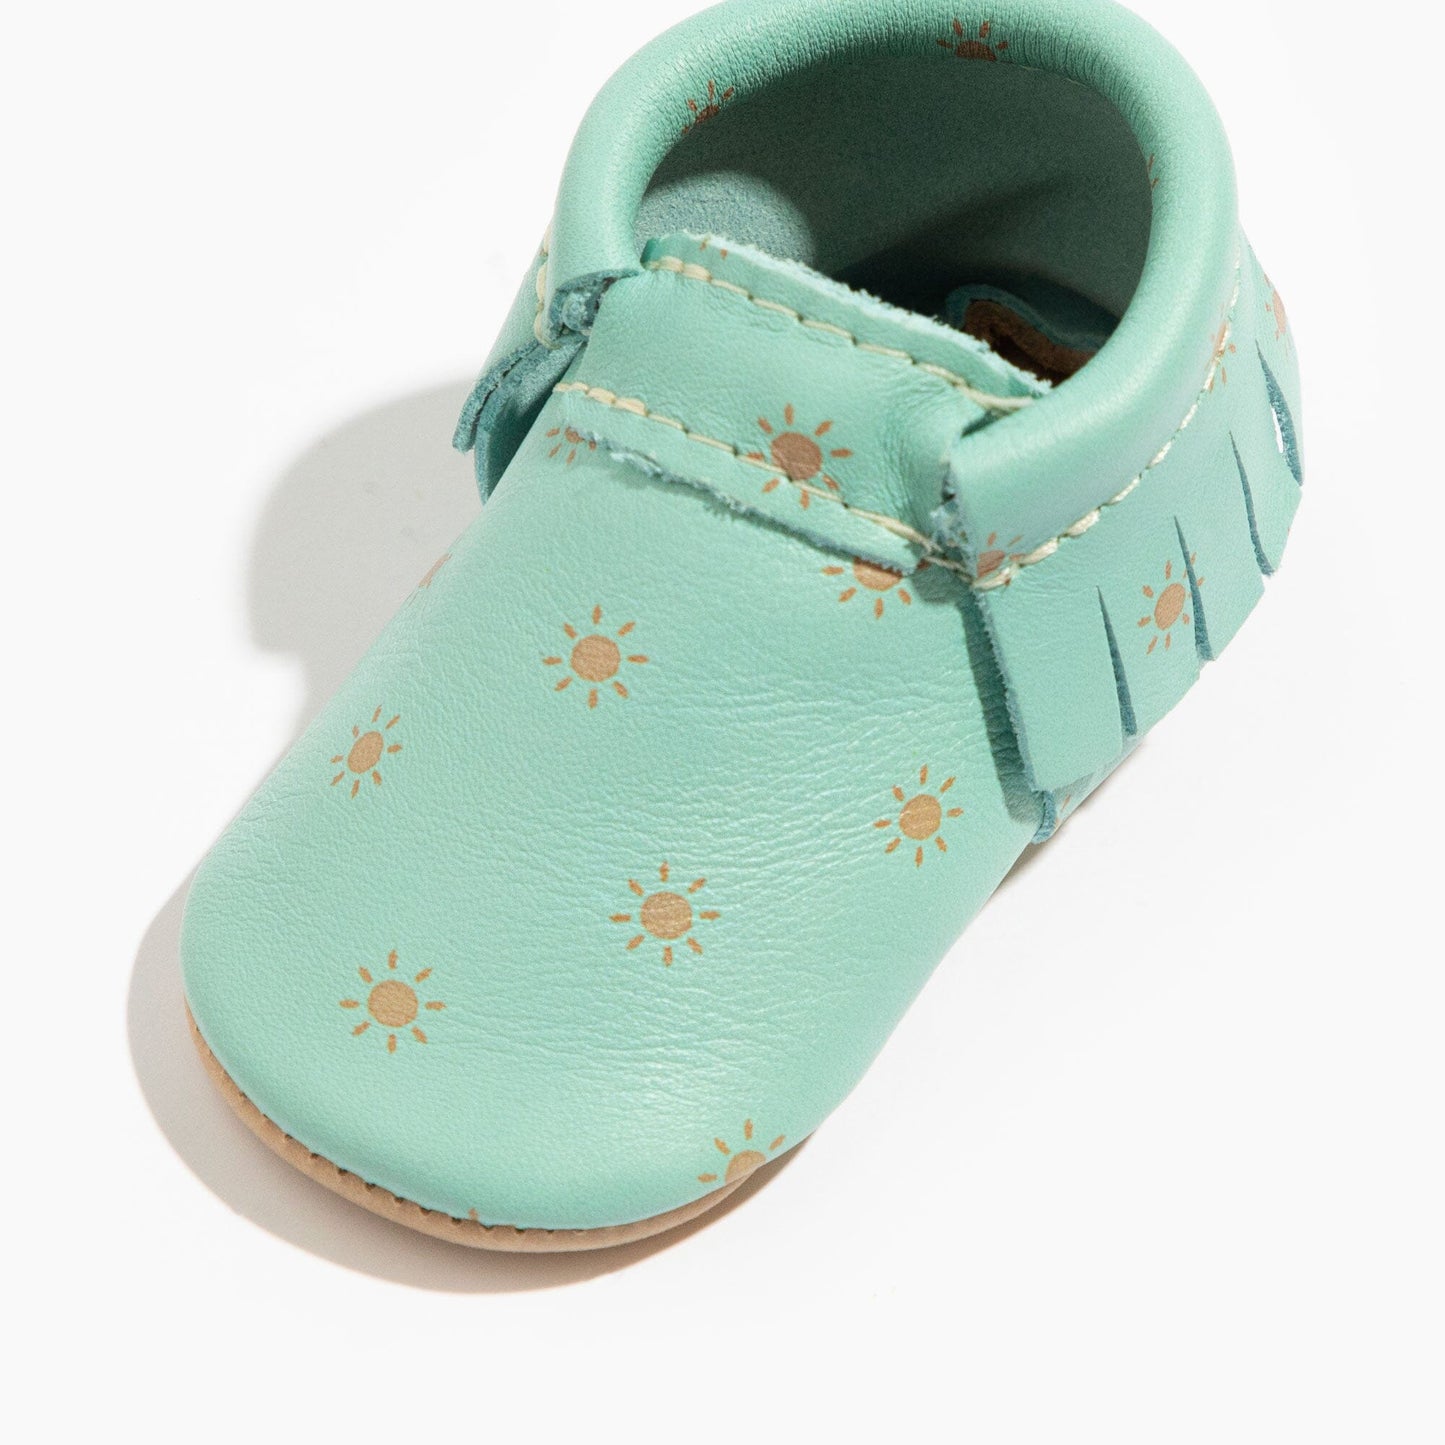 Sunbeam Moccasin Baby Shoe Moccasin Soft Sole 